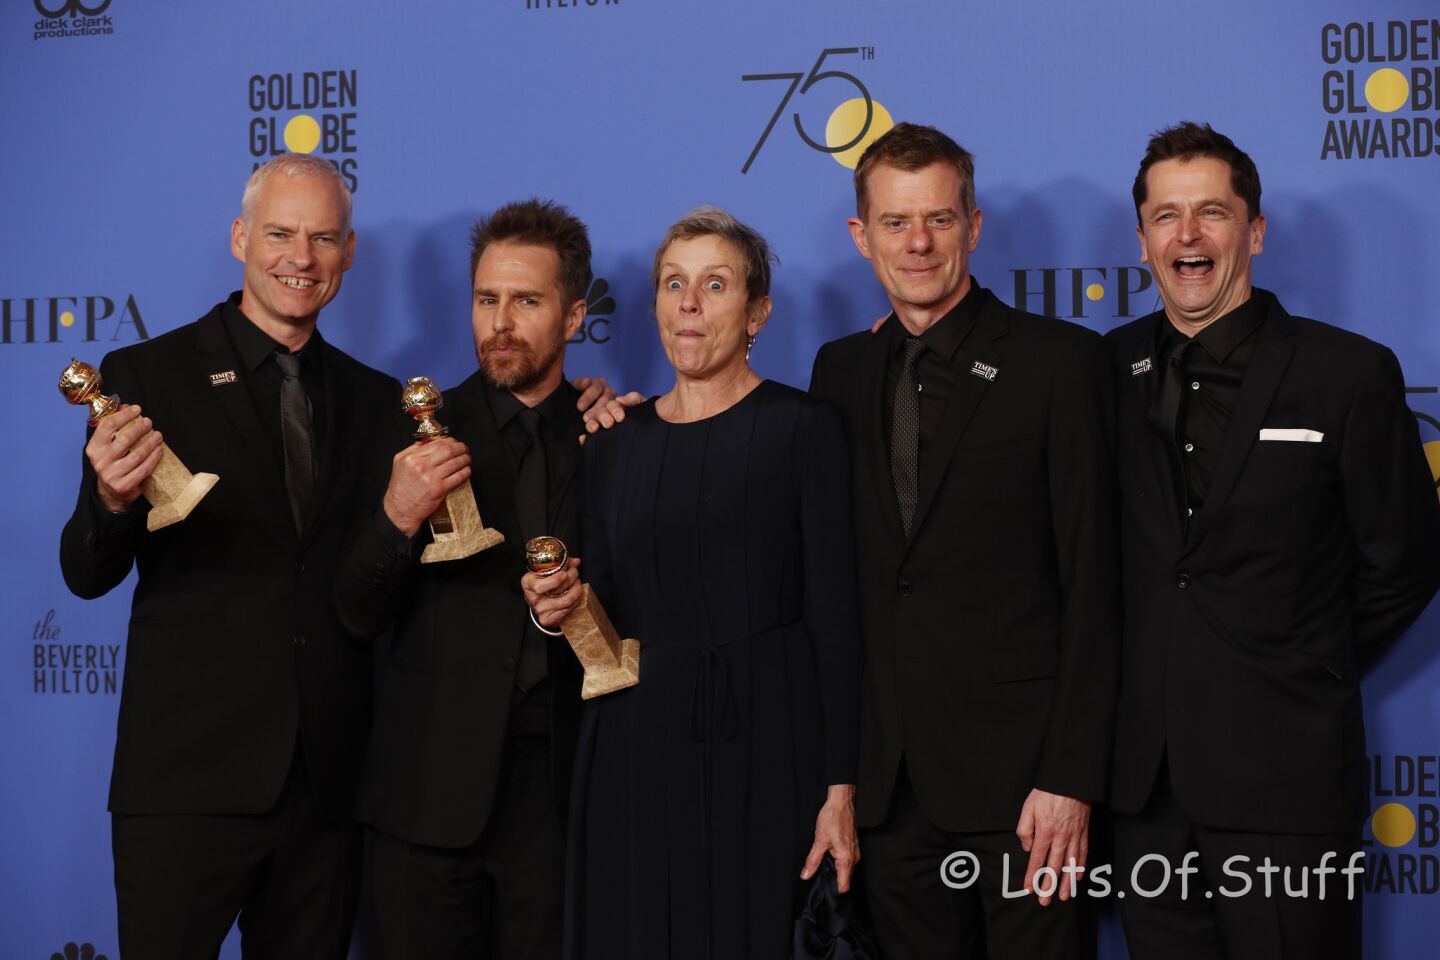 Martin McDonagh, left, Sam Rockwell, Frances McDormand, Graham Broadbent and Peter Czernin celebrate after winning the award for best motion picture drama for "Three Billboards Outside Ebbing, Missouri." Rockwell and McDormand won acting awards for the film too.